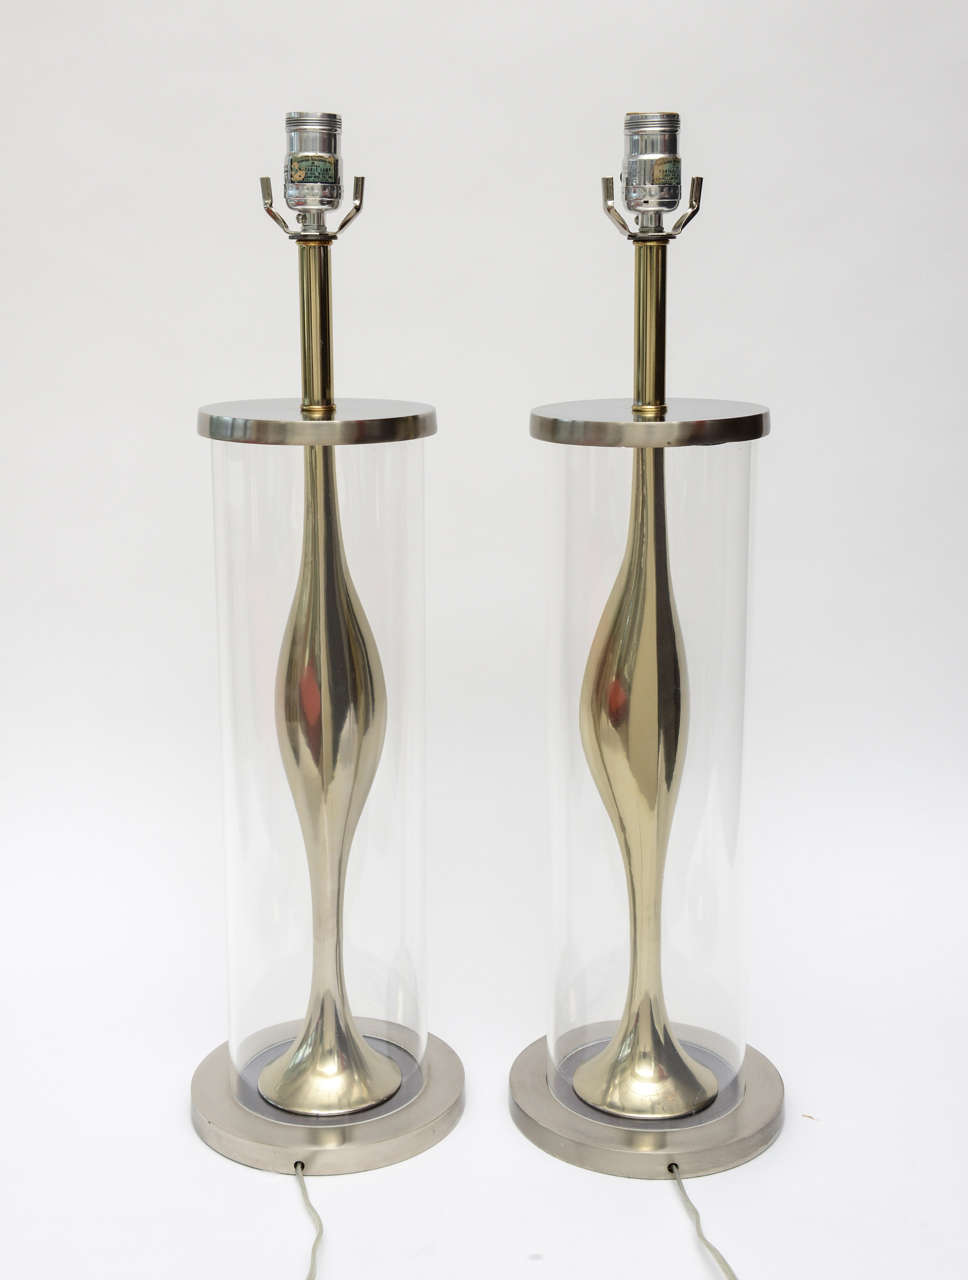 These very sculptural pair of Mid-Century Modern Laurel lamps are unusual, they have brushed stainless and polished brass with a lucite cylinder on the outside encasing the metal work. They have a sensuality to them in their form. Laurel Lamp Co.